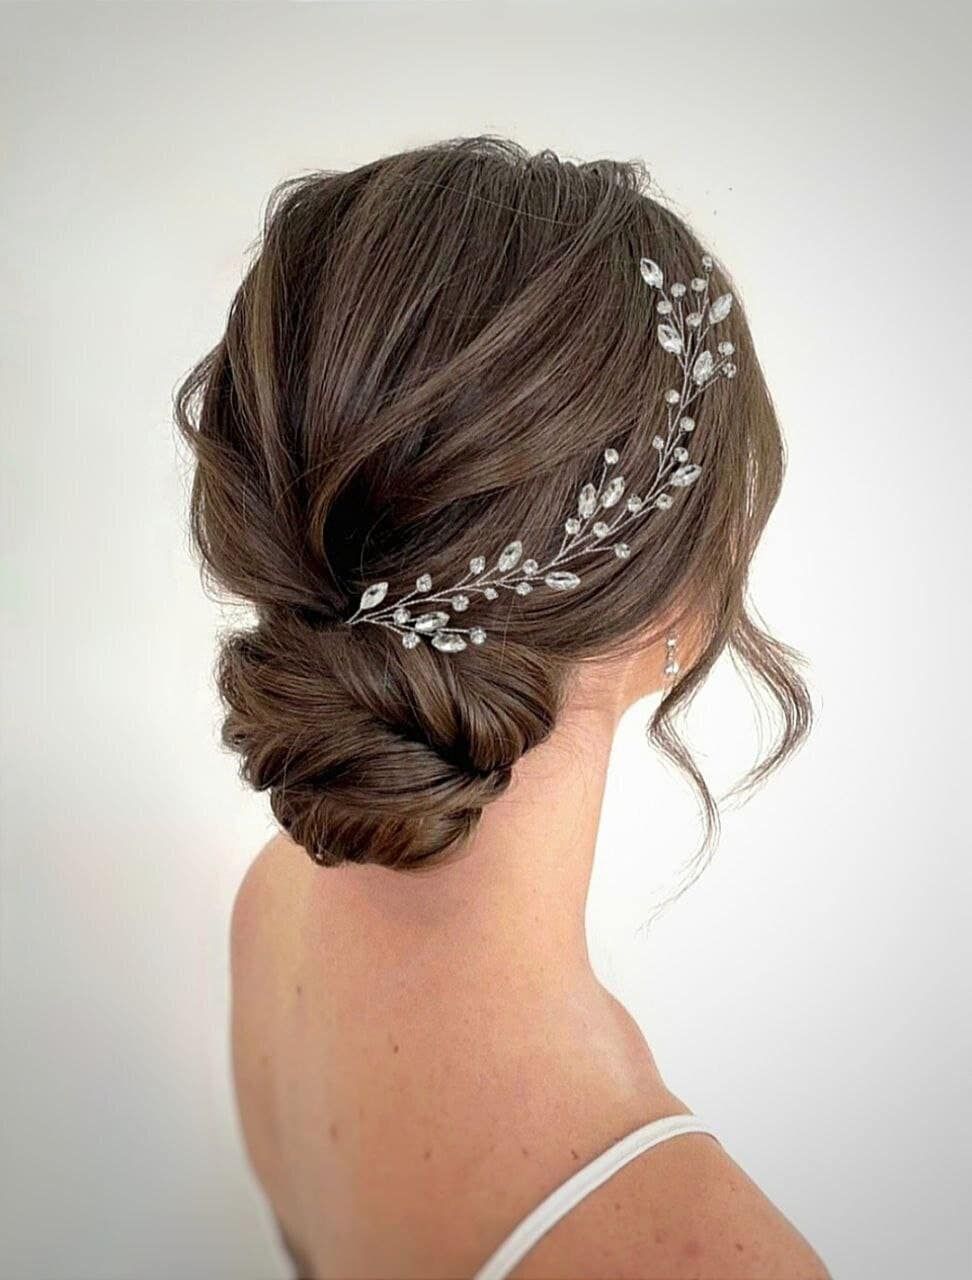 Stunning Wedding Hair Updo Ideas for the Perfect Bridal Look